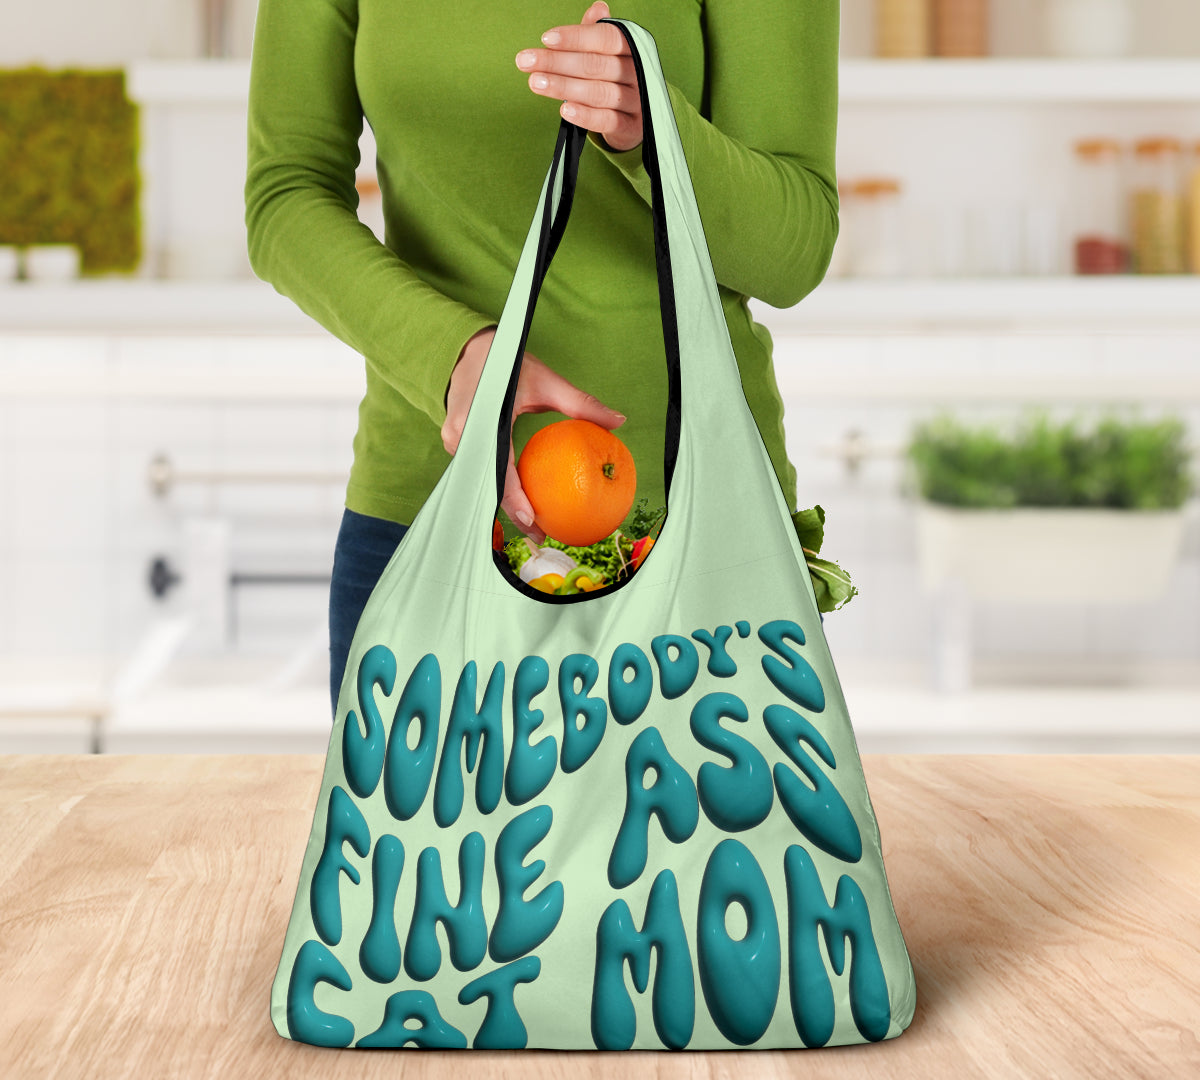 Somebody's Fine Ass Cat Mom Puffy Inflated Design 3 Pack Grocery Bags - Mom and Dad Collection